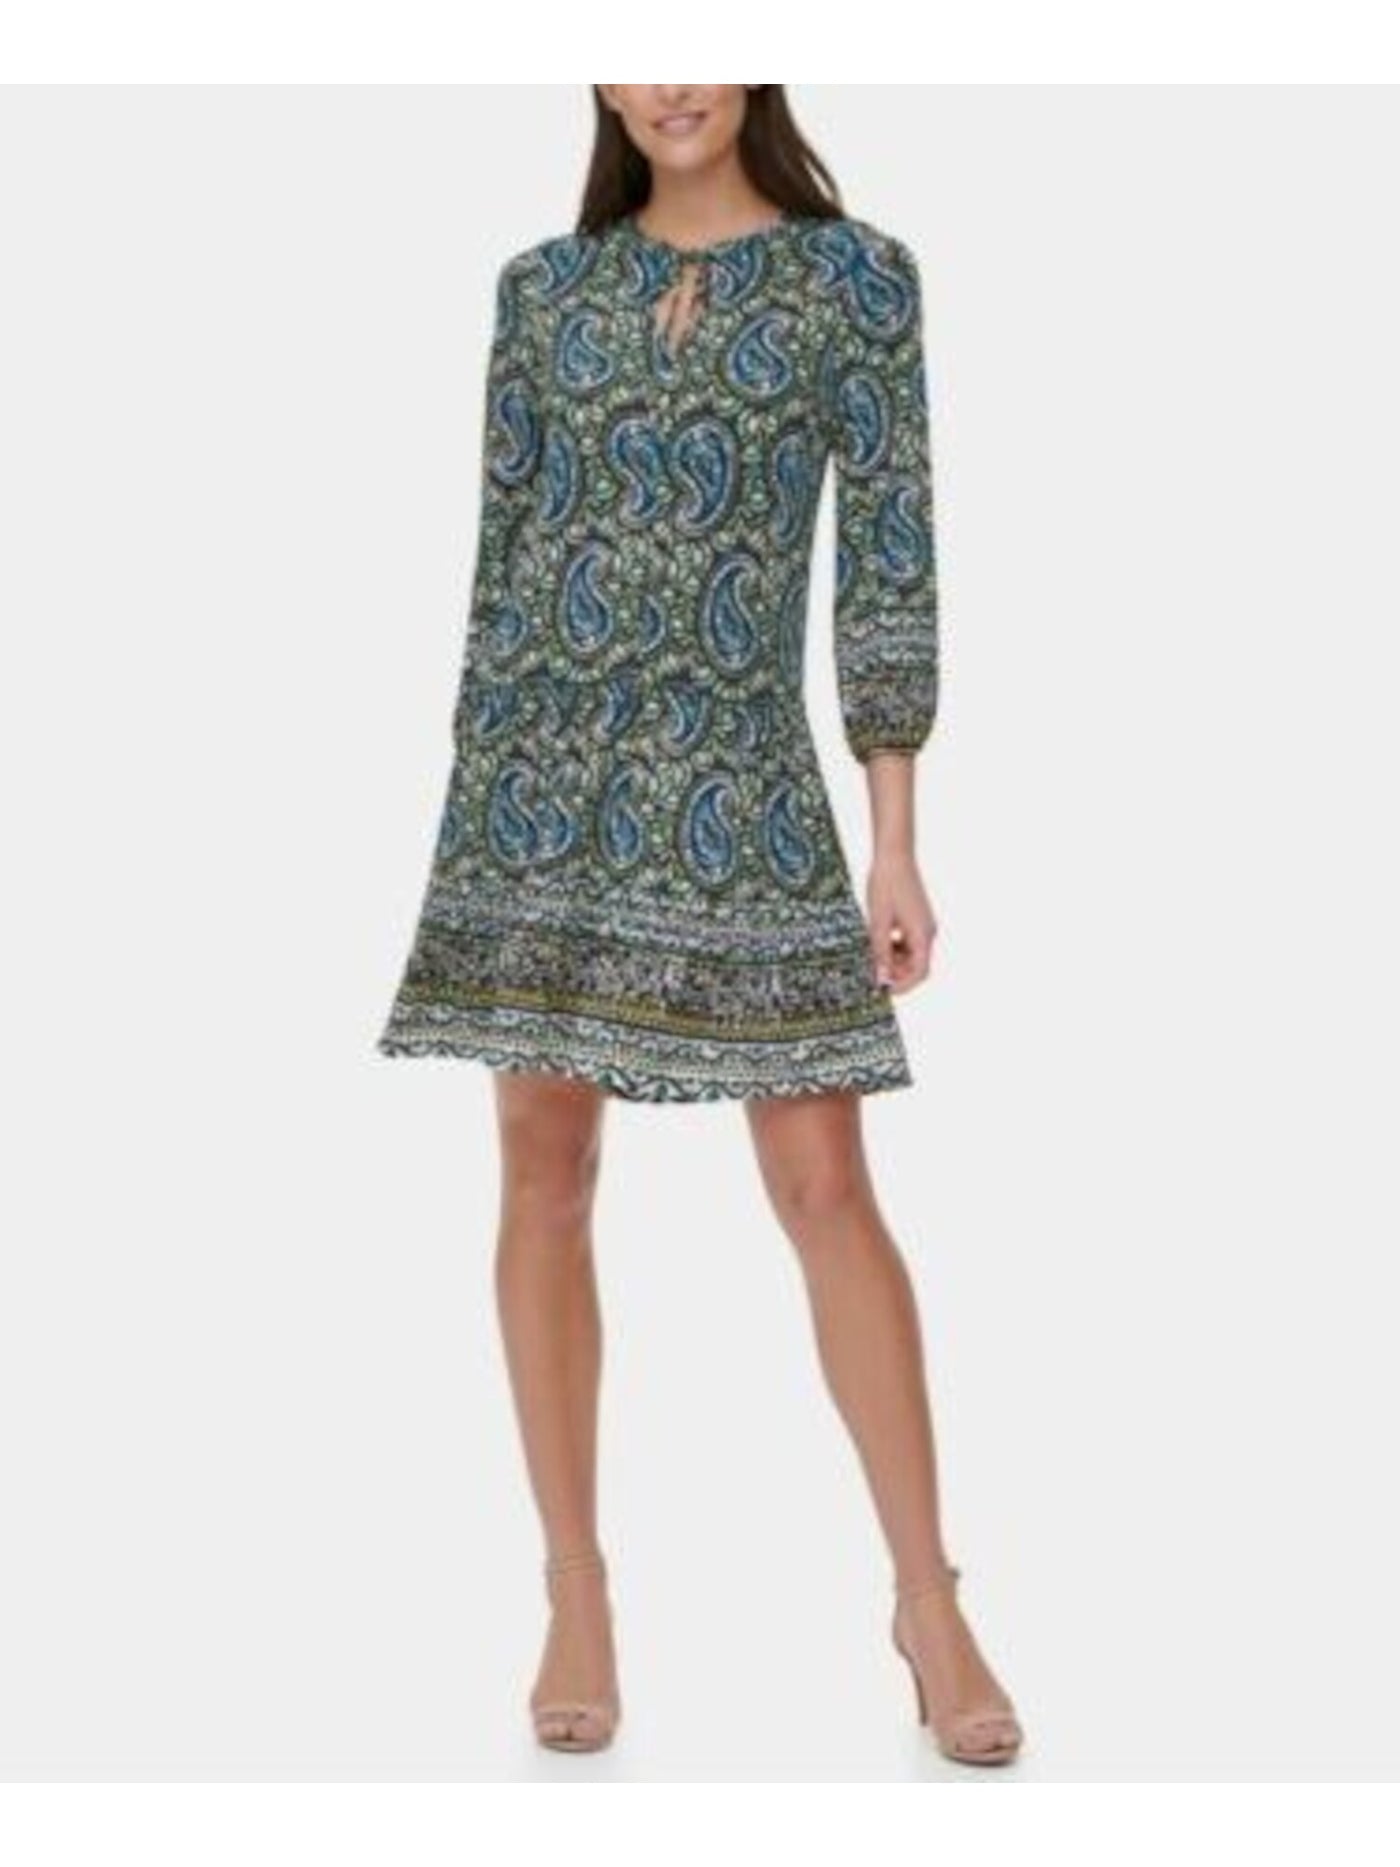 TOMMY HILFIGER Womens Green Stretch Paisley 3/4 Sleeve Tie Neck Above The Knee Wear To Work Fit + Flare Dress Plus 22W